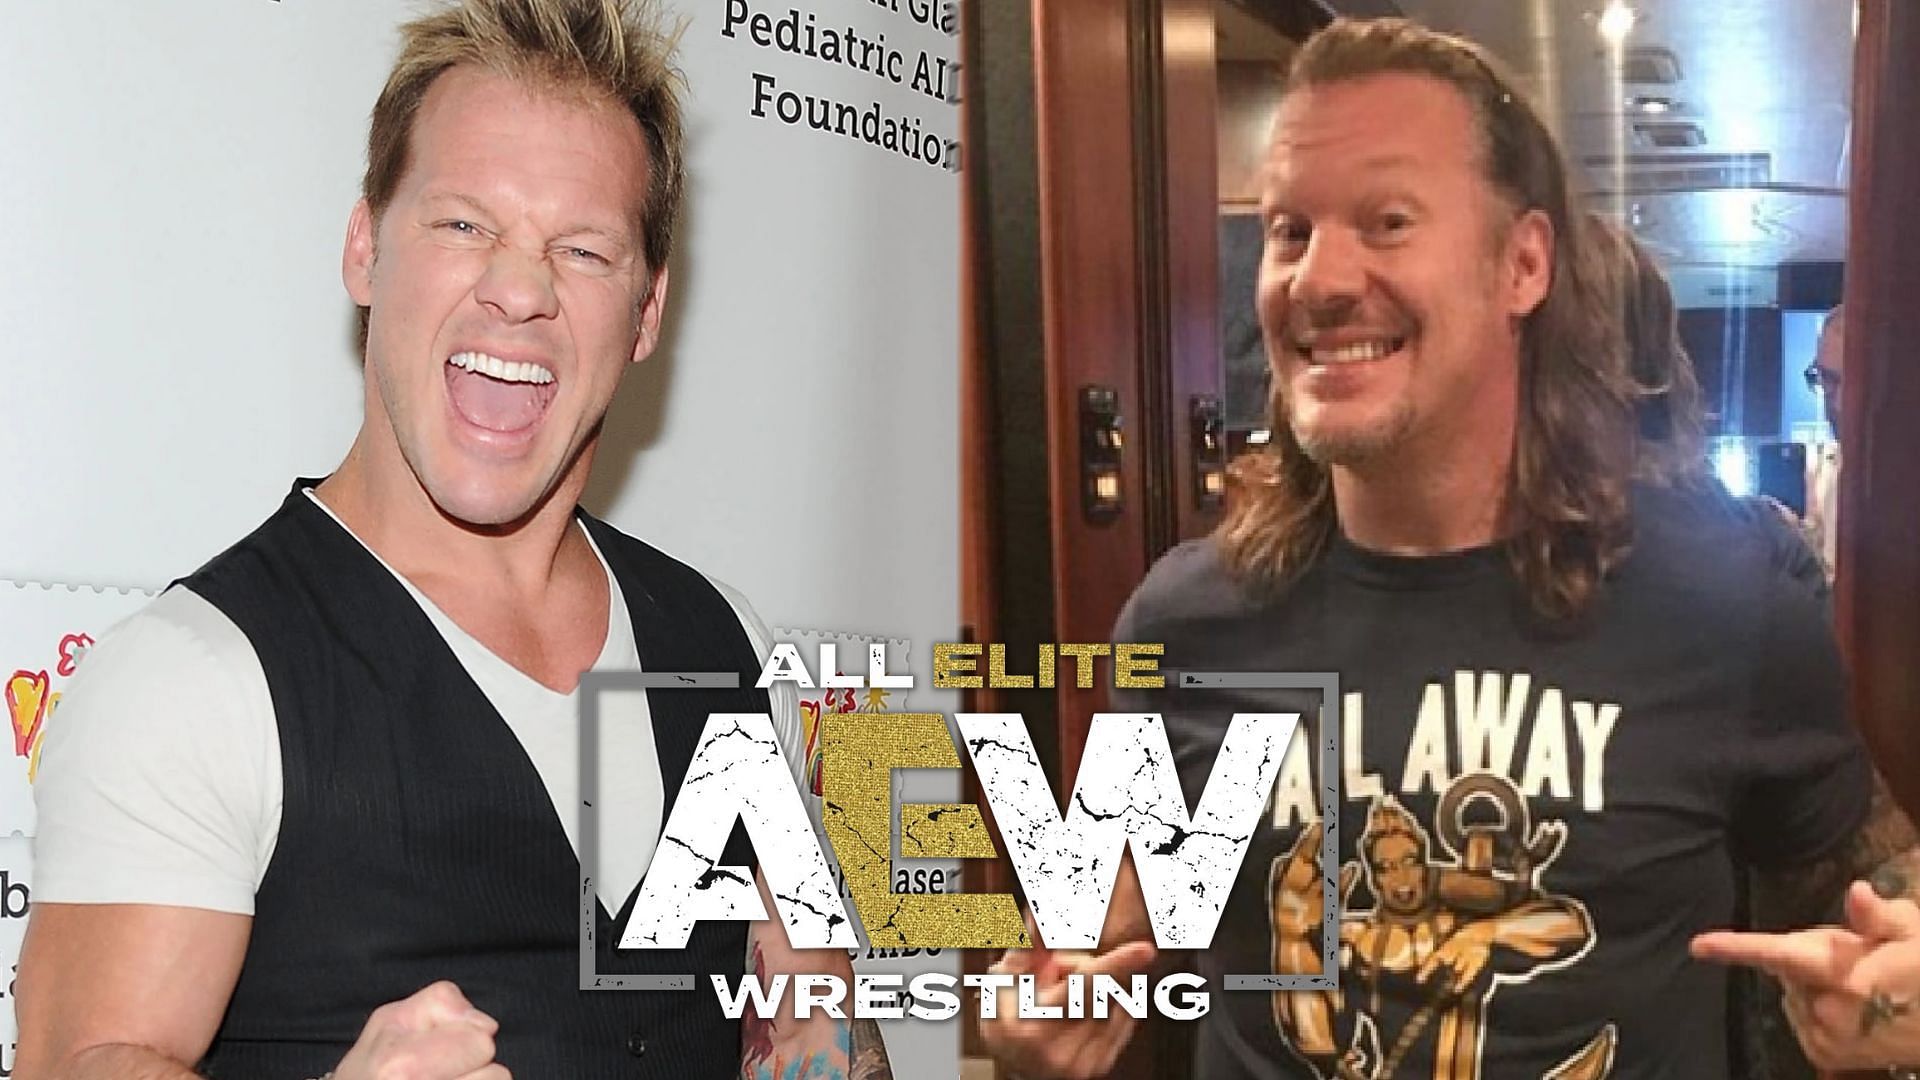 Within AEW, Chris Jericho is considered to be a locker room leader